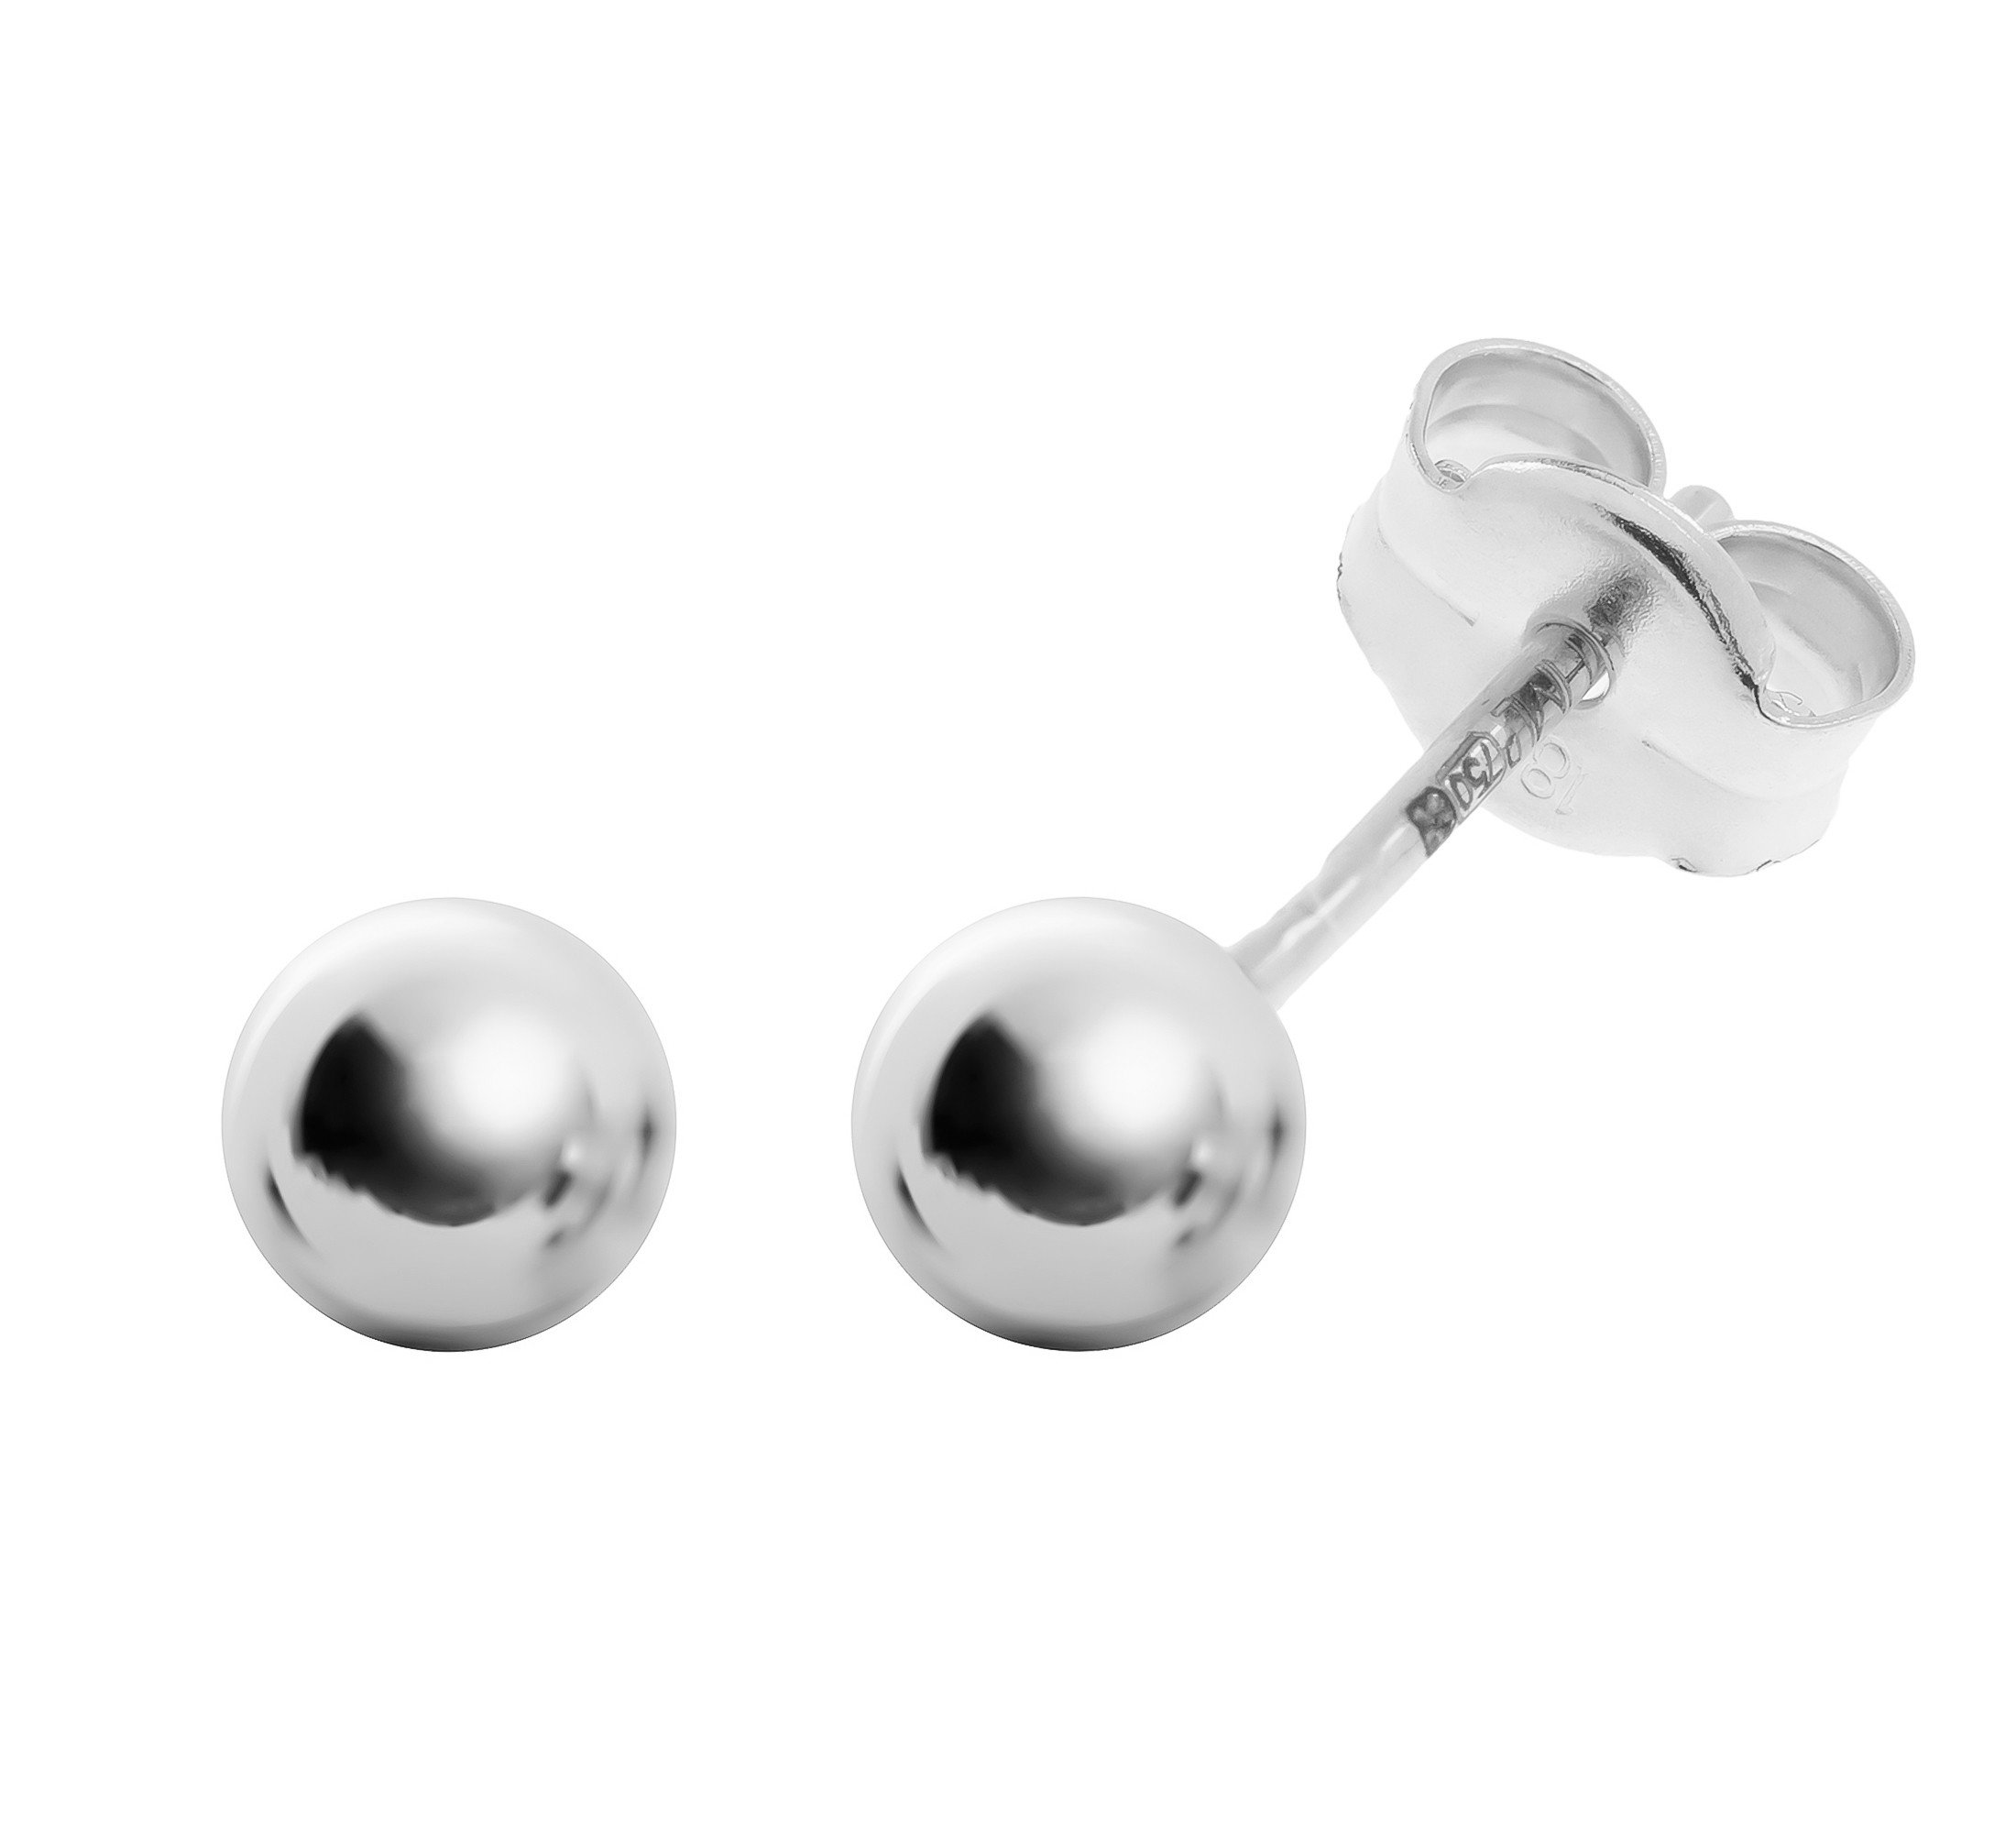 18ct White Gold 4mm Ball Stud Earrings | Buy Online | Free and Fast UK ...